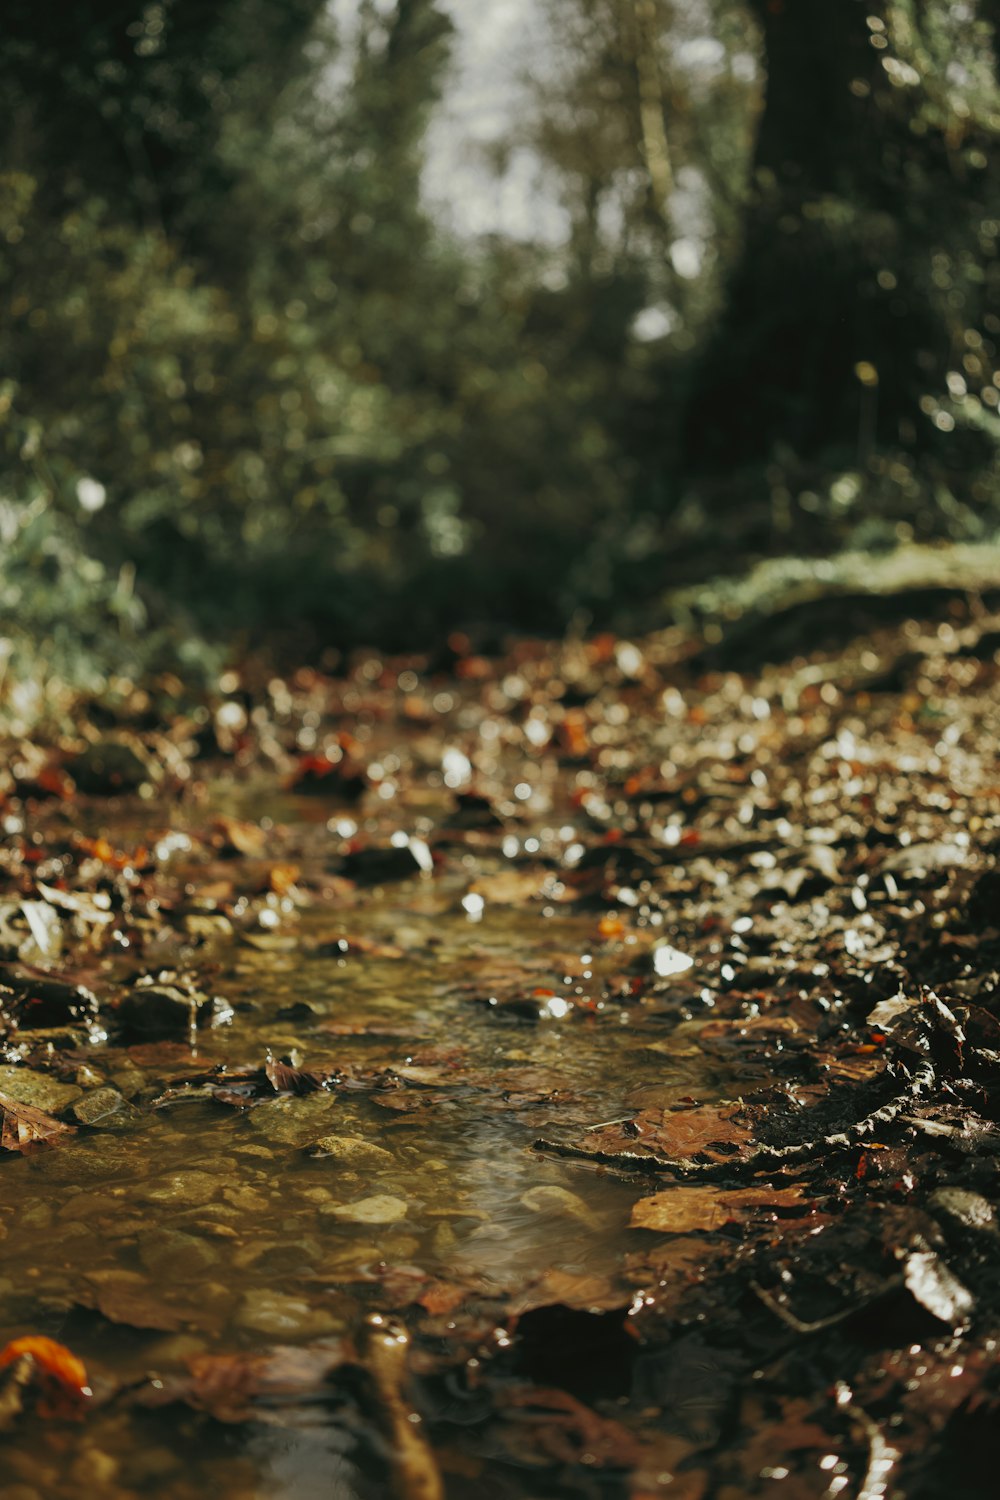 a stream running through a forest filled with lots of leaves